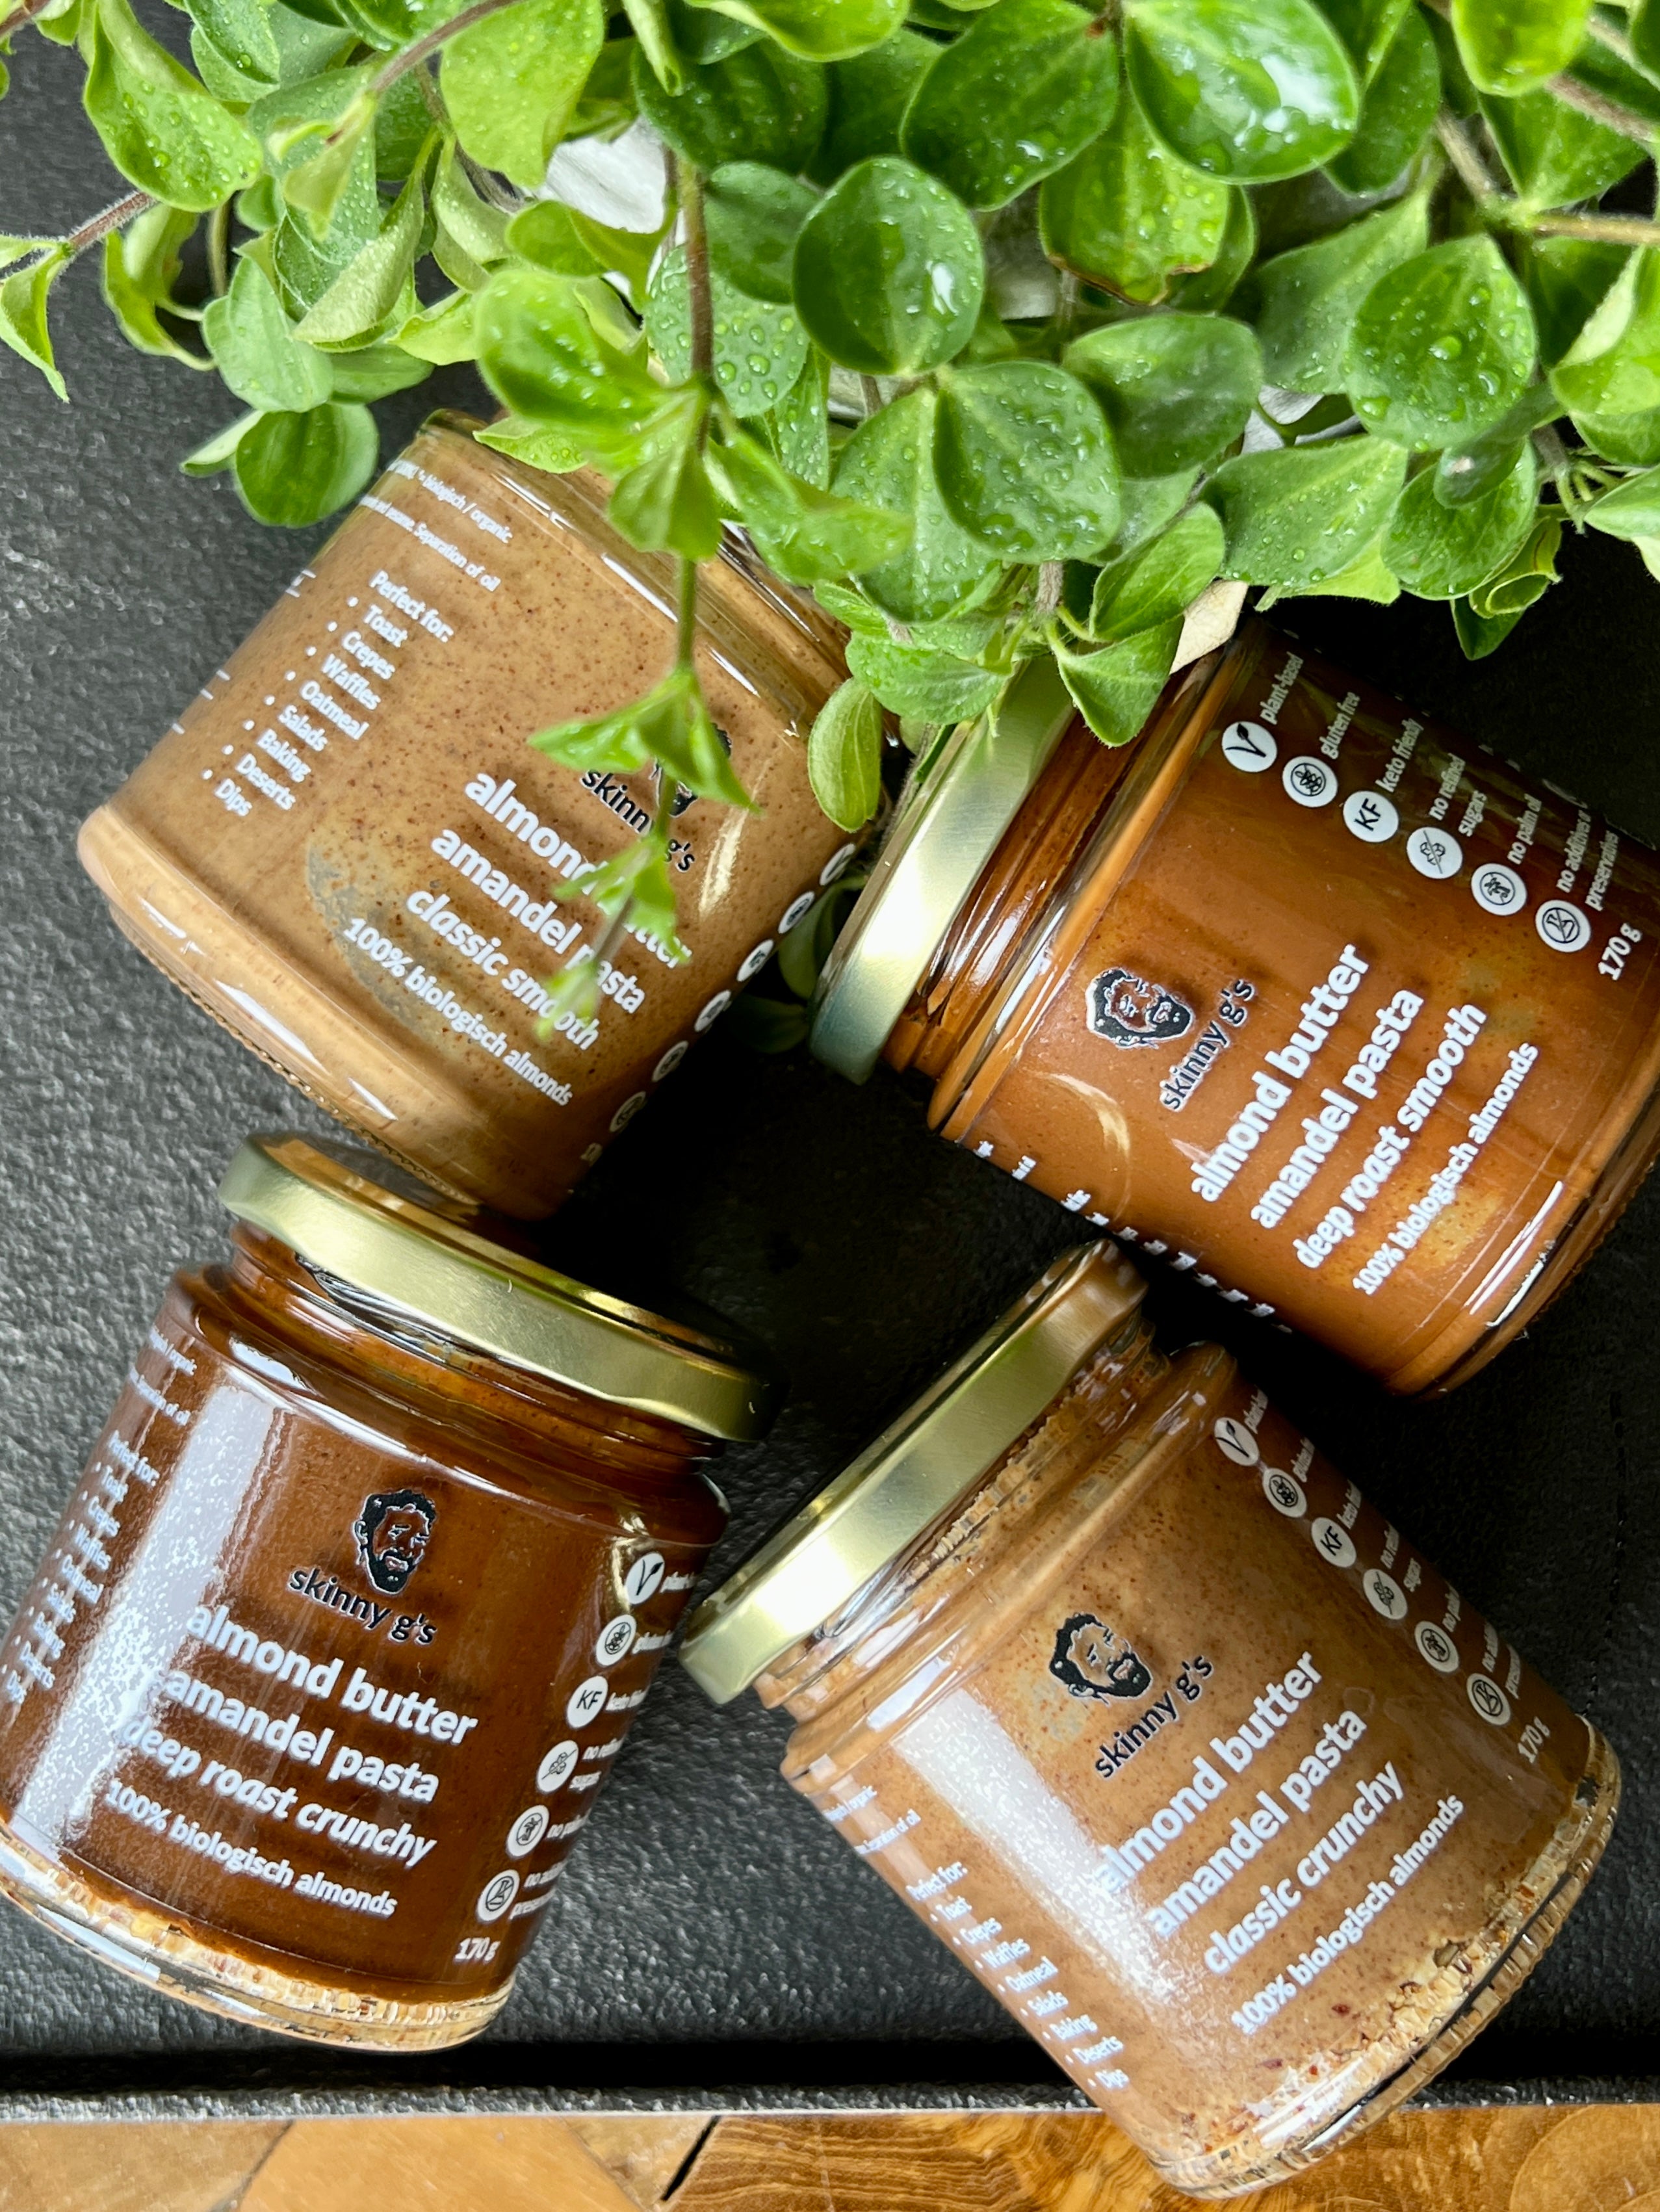 skinny g's almond butter all four flavours - classic smooth, classic crunchy, deep roast smooth and deep roast crunchy; with a plant for aesthetics